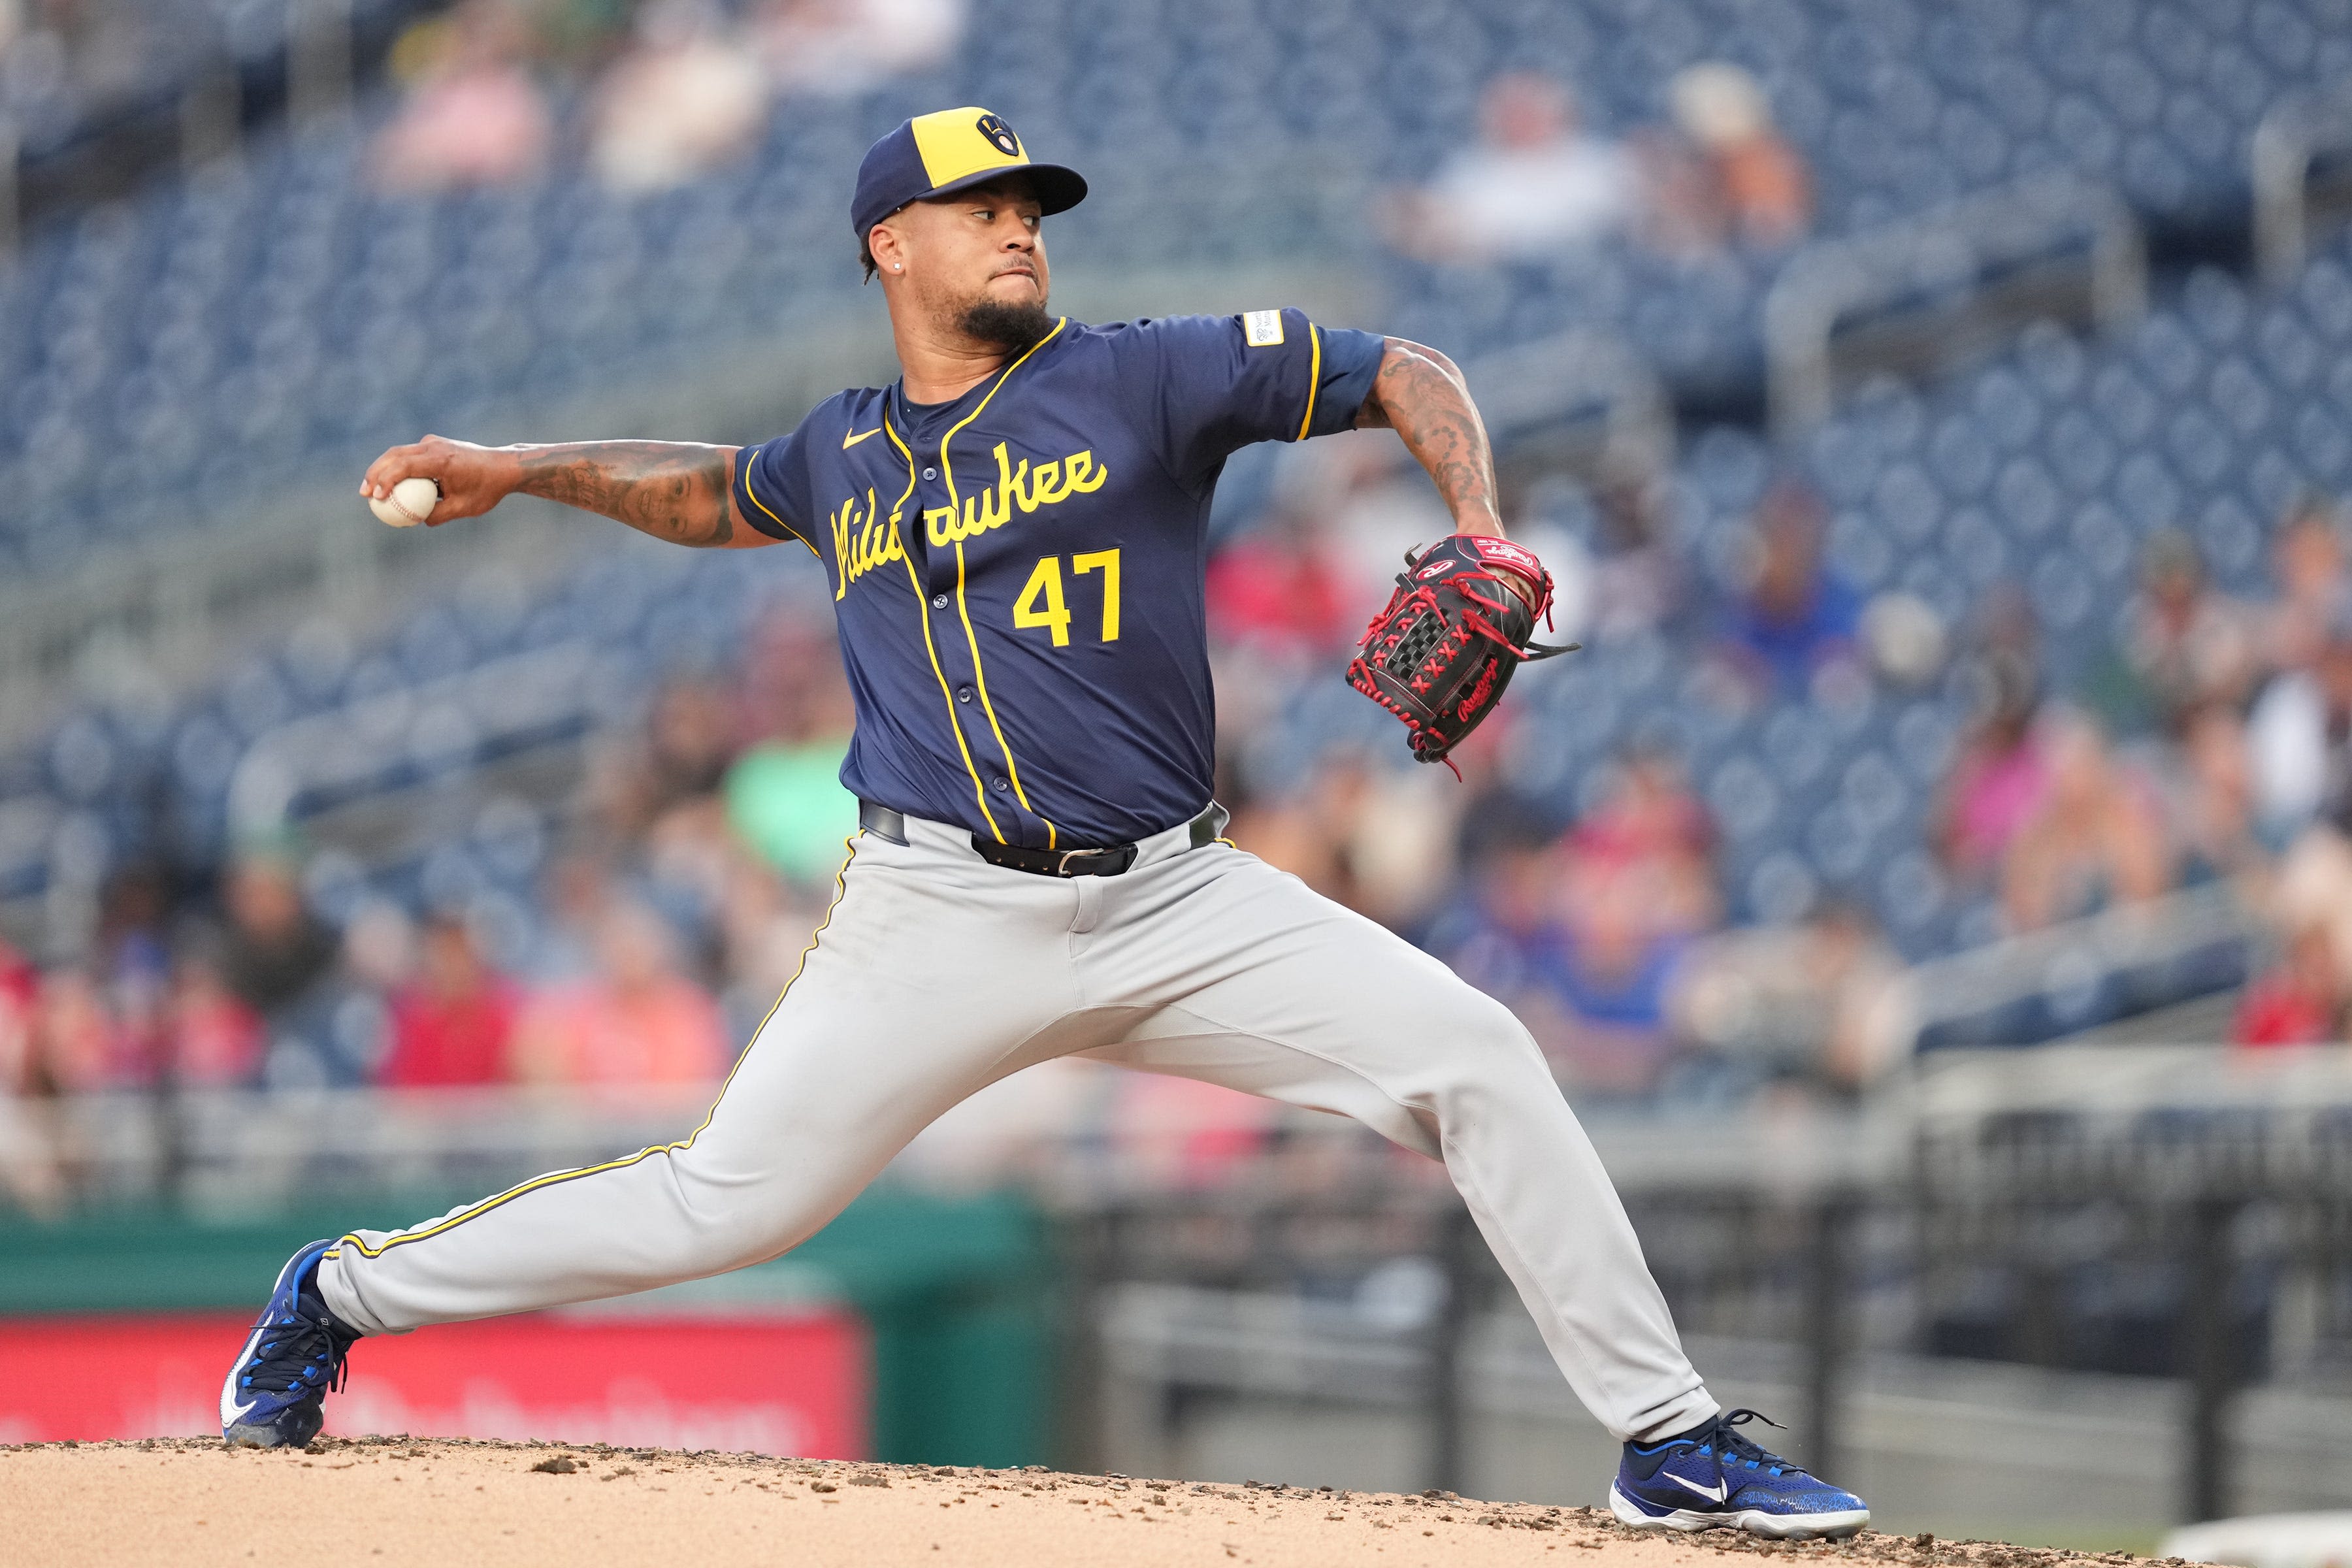 Brewers 8, Nationals 3: Mixed results from Frankie Montas in his debut, but the bats carried the way